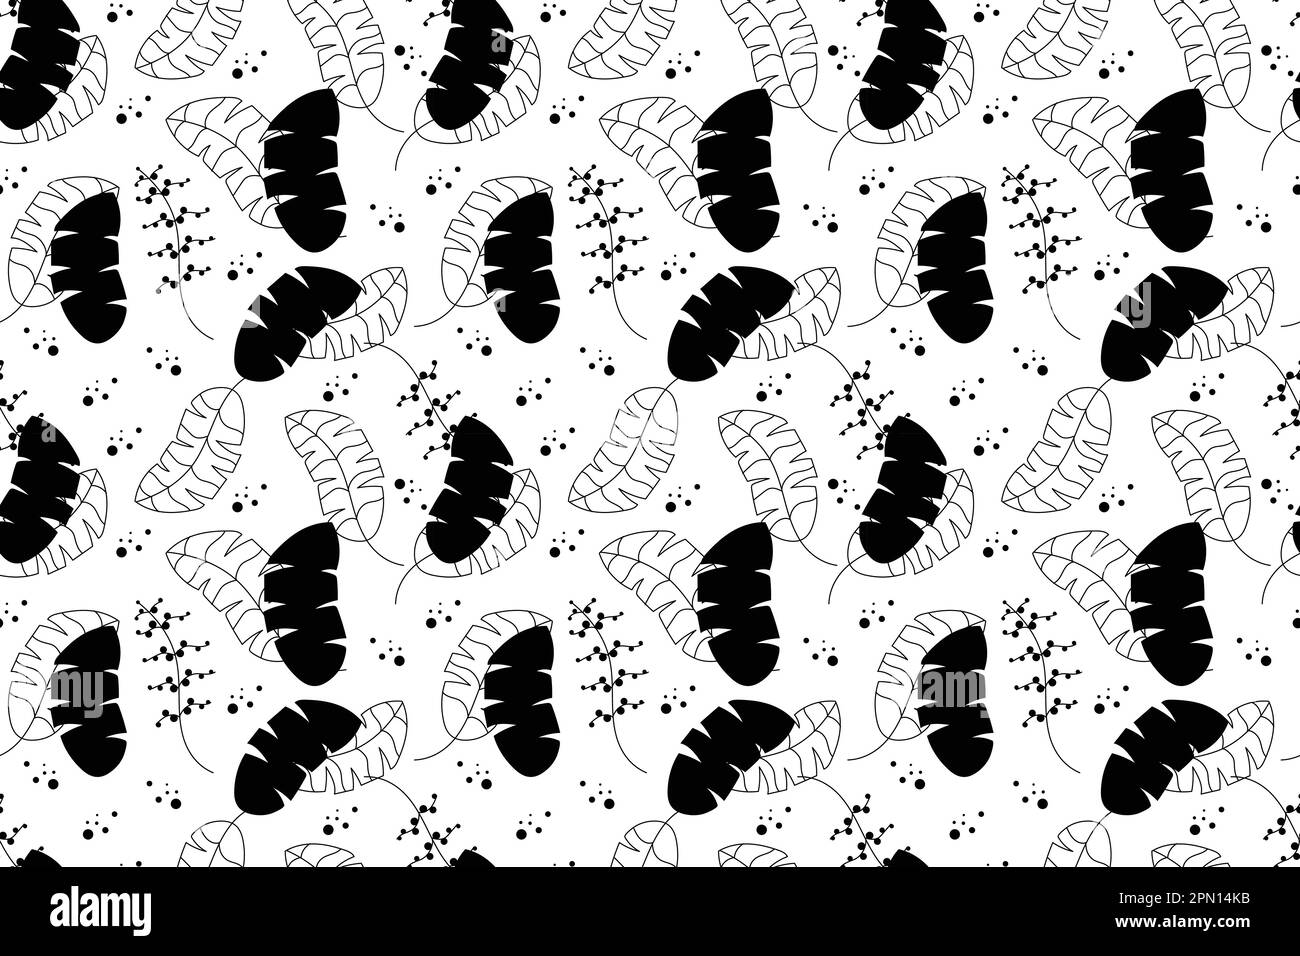 Engraving leaf monstera seamless pattern, vintage leaves background, repeated texture in hand drawn style for fabric, wrapping paper, wallpaper. Gypsy style. Vector illustration Stock Vector